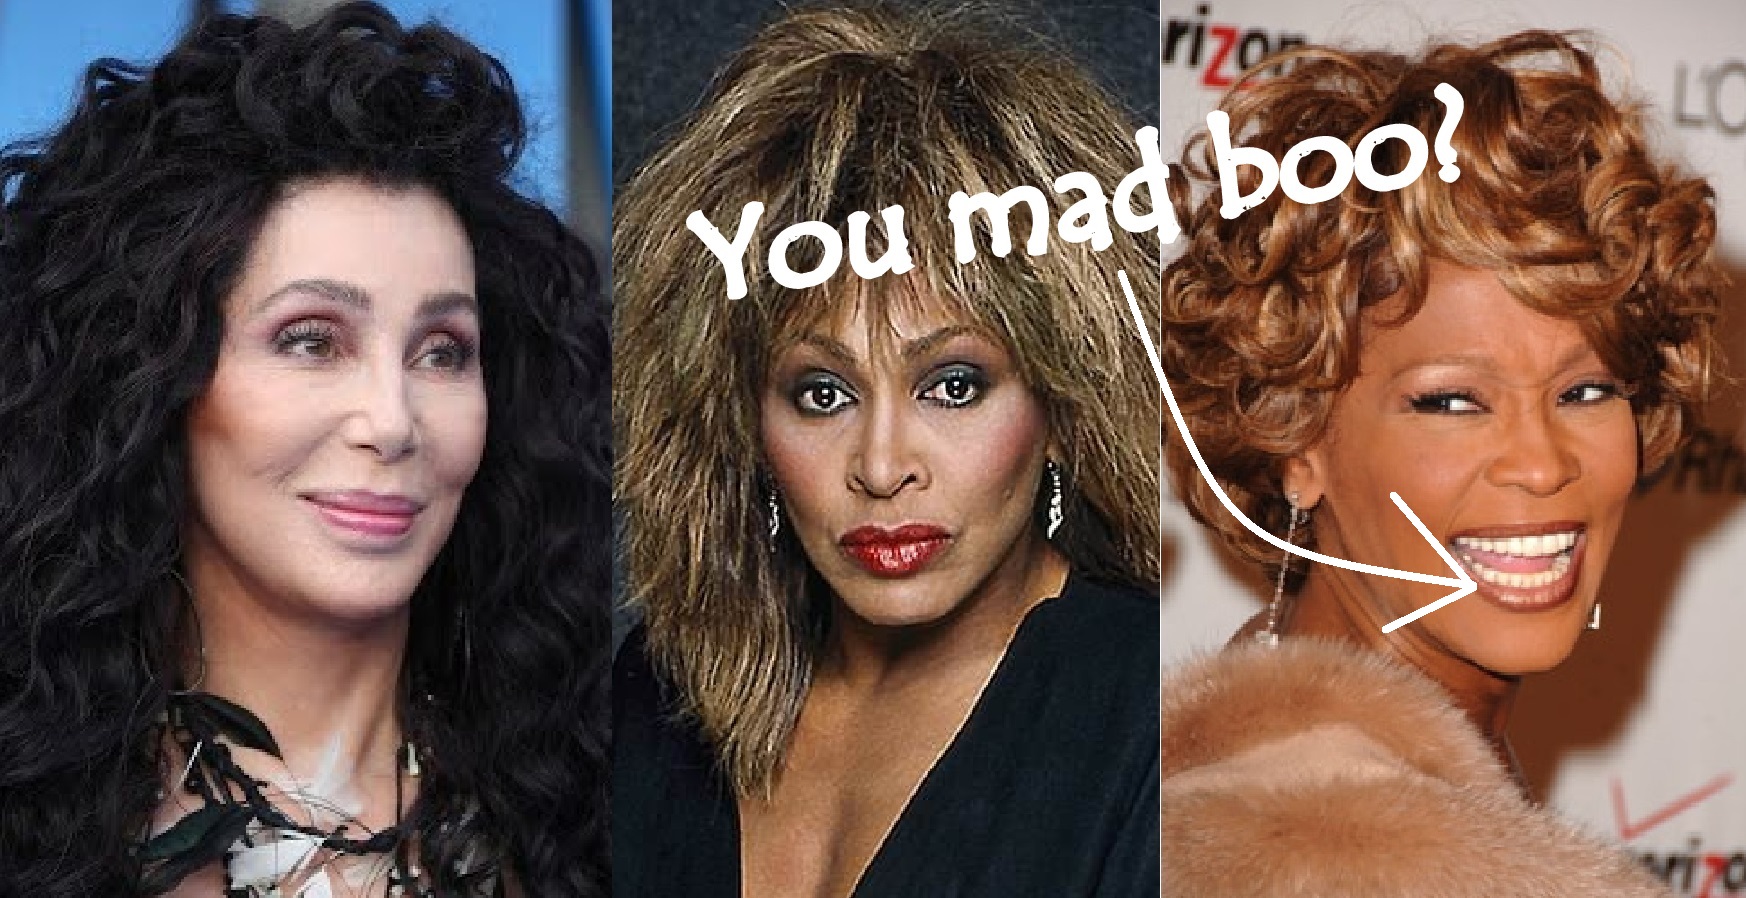 Throwback to VH1 Divas ’99: The Backstage Tensions Between Whitney Houston, Tina Turner and Cher!